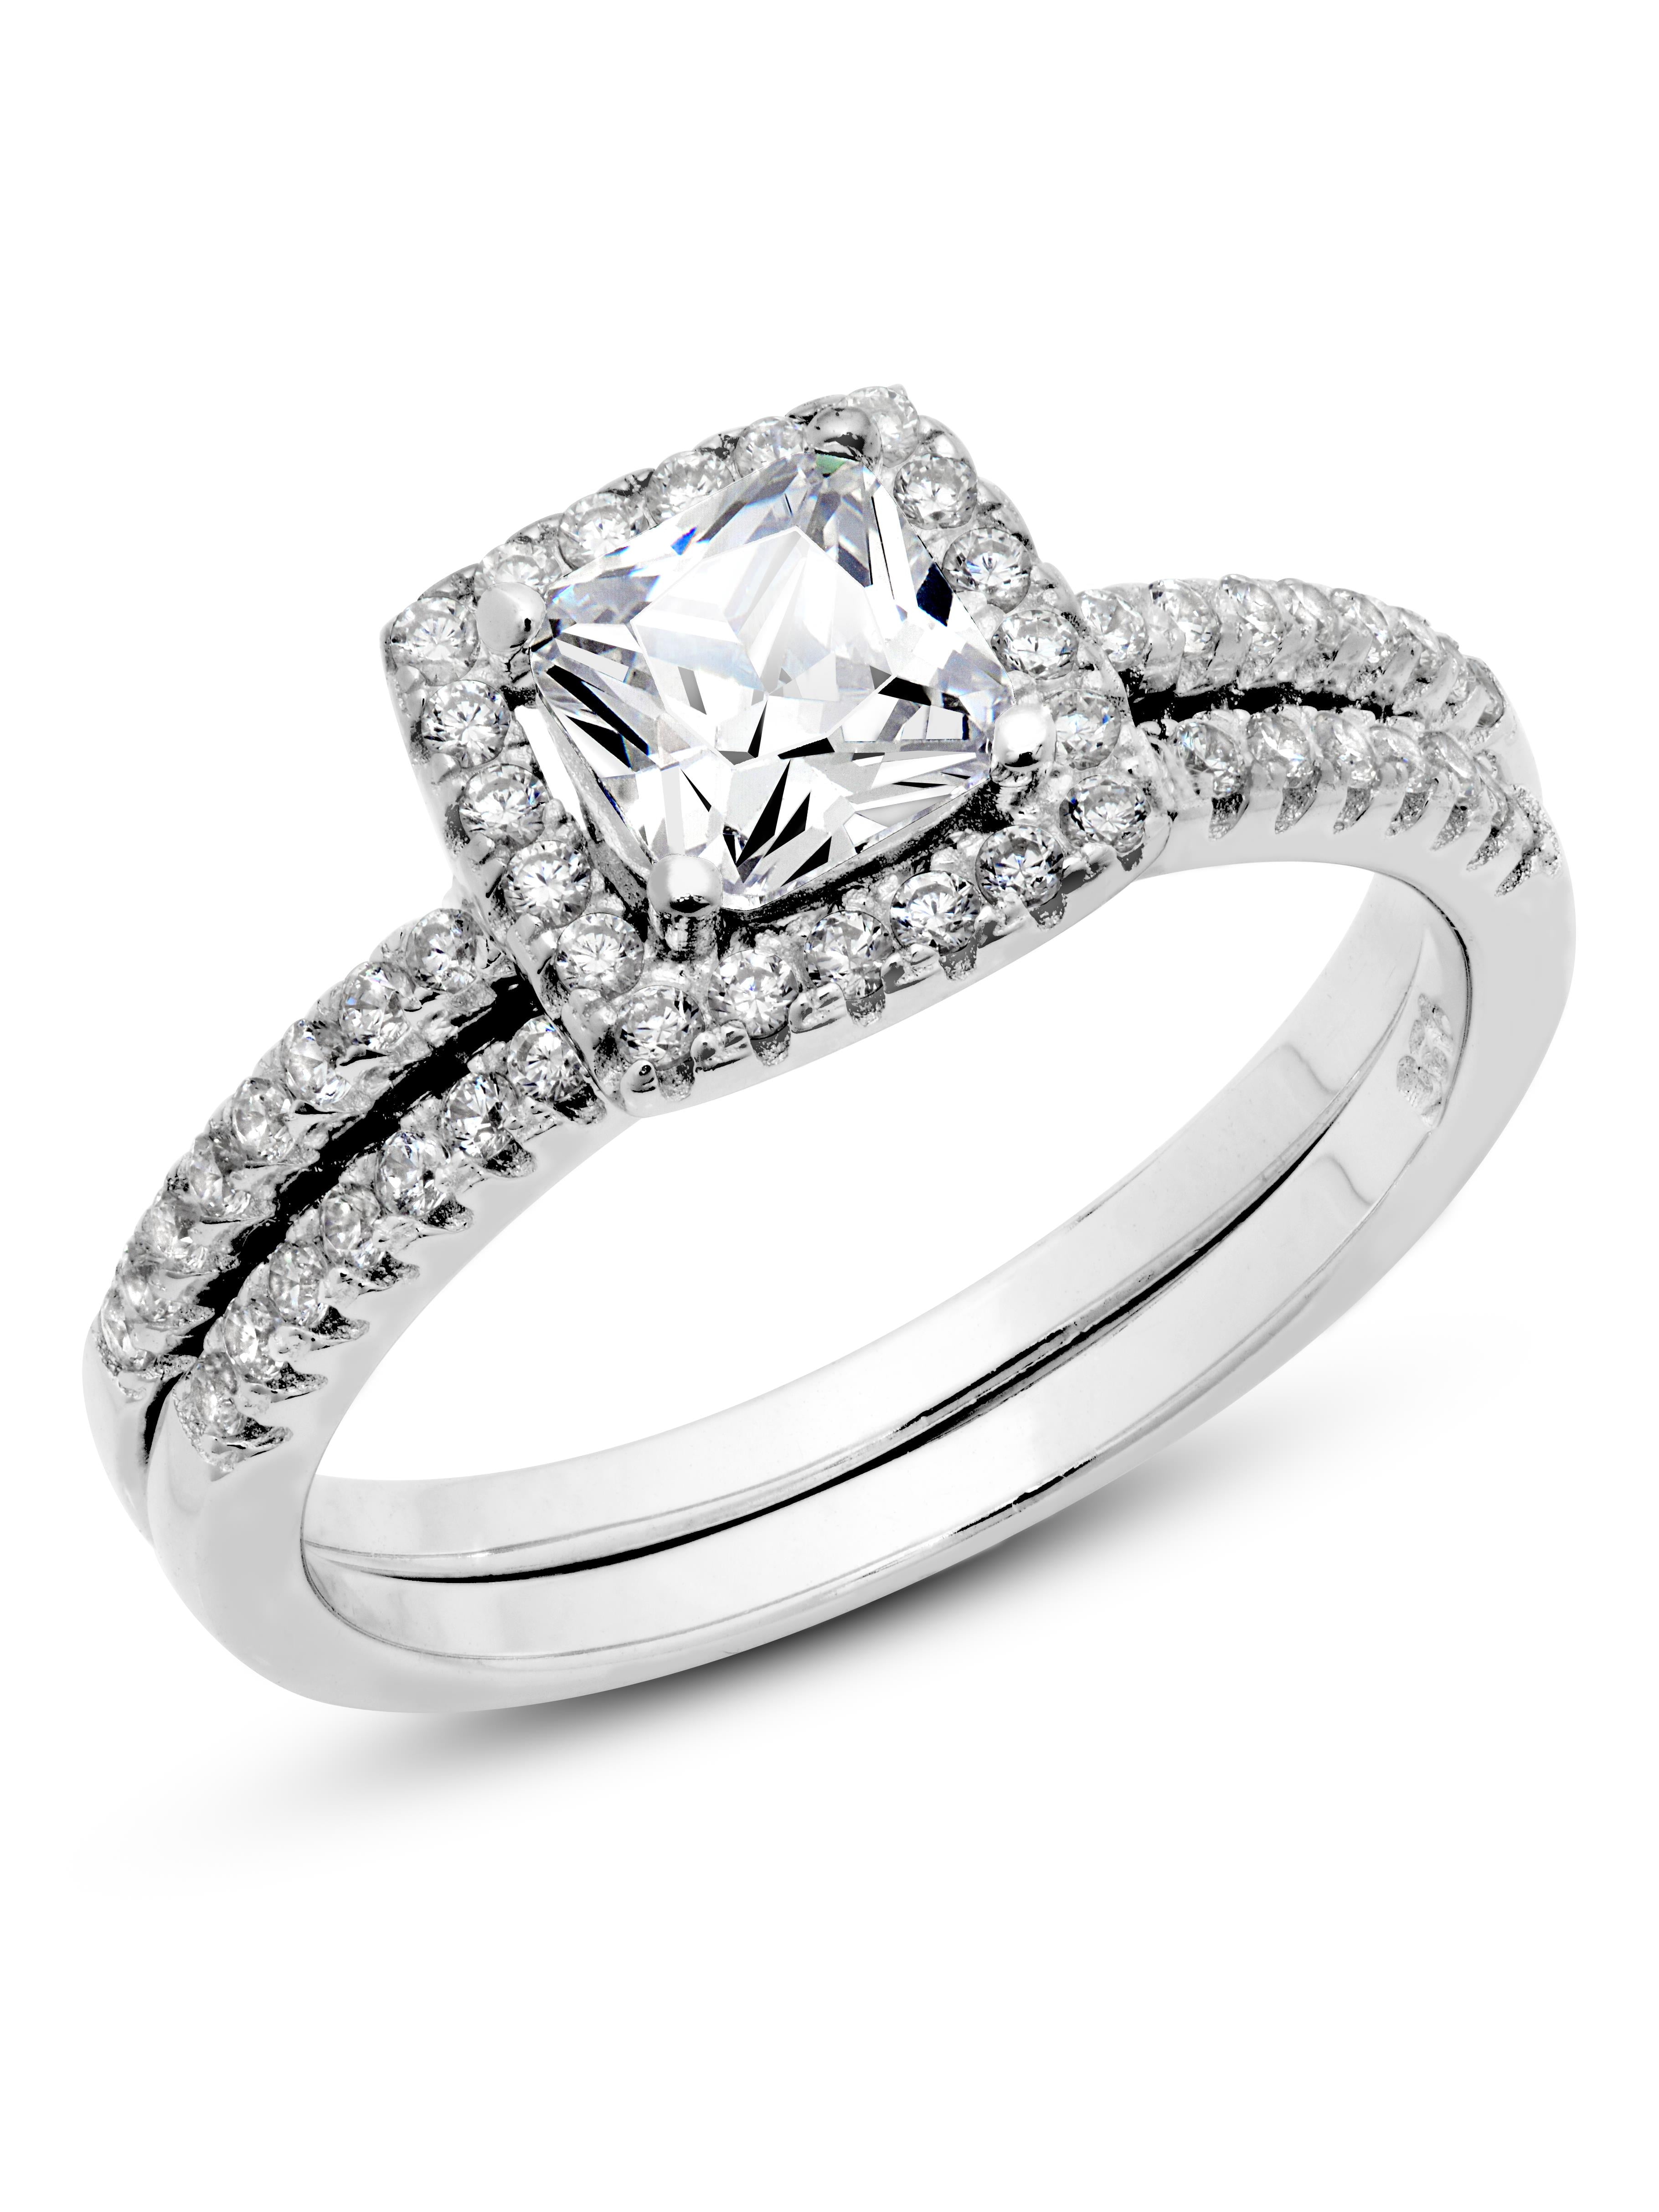 Sterling Silver 925 Cubic Zirconia Engagement Style Ring